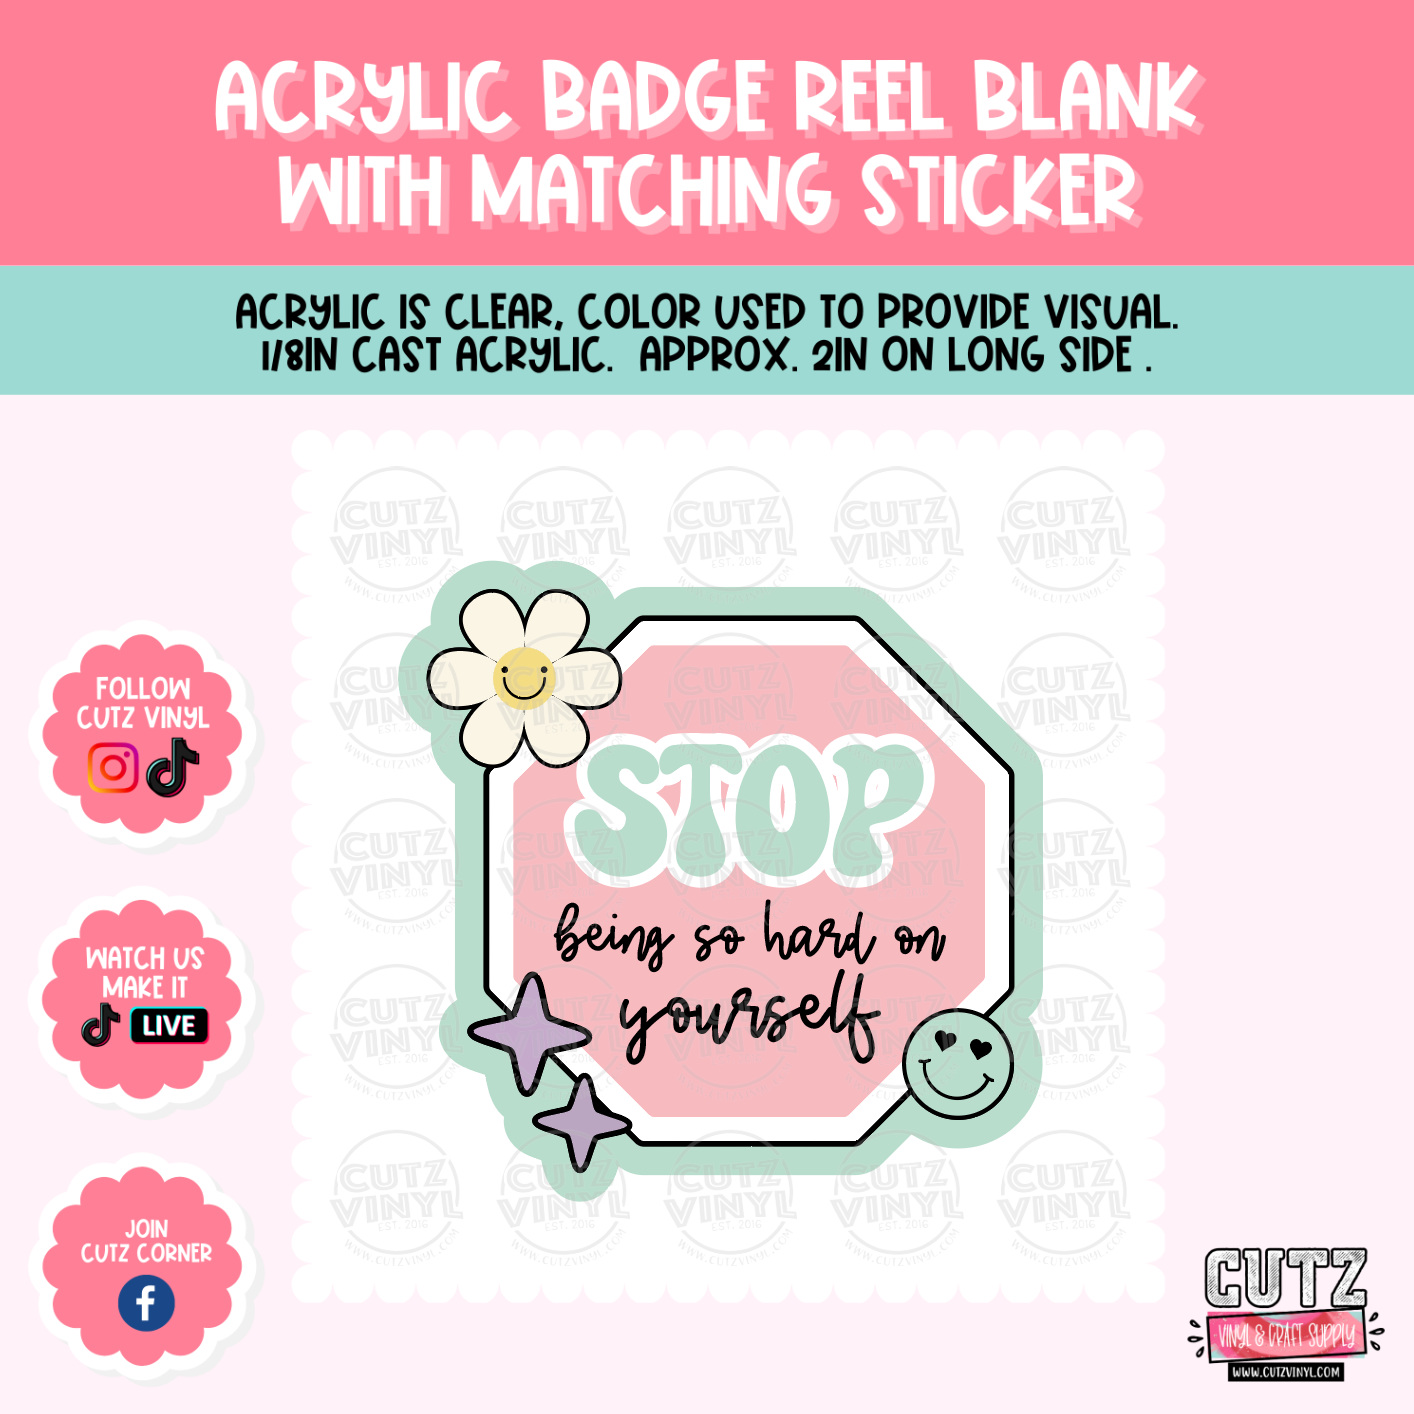 Stop Being So Hard On Yourself Retro - Acrylic Badge Reel Blank and Matching Sticker